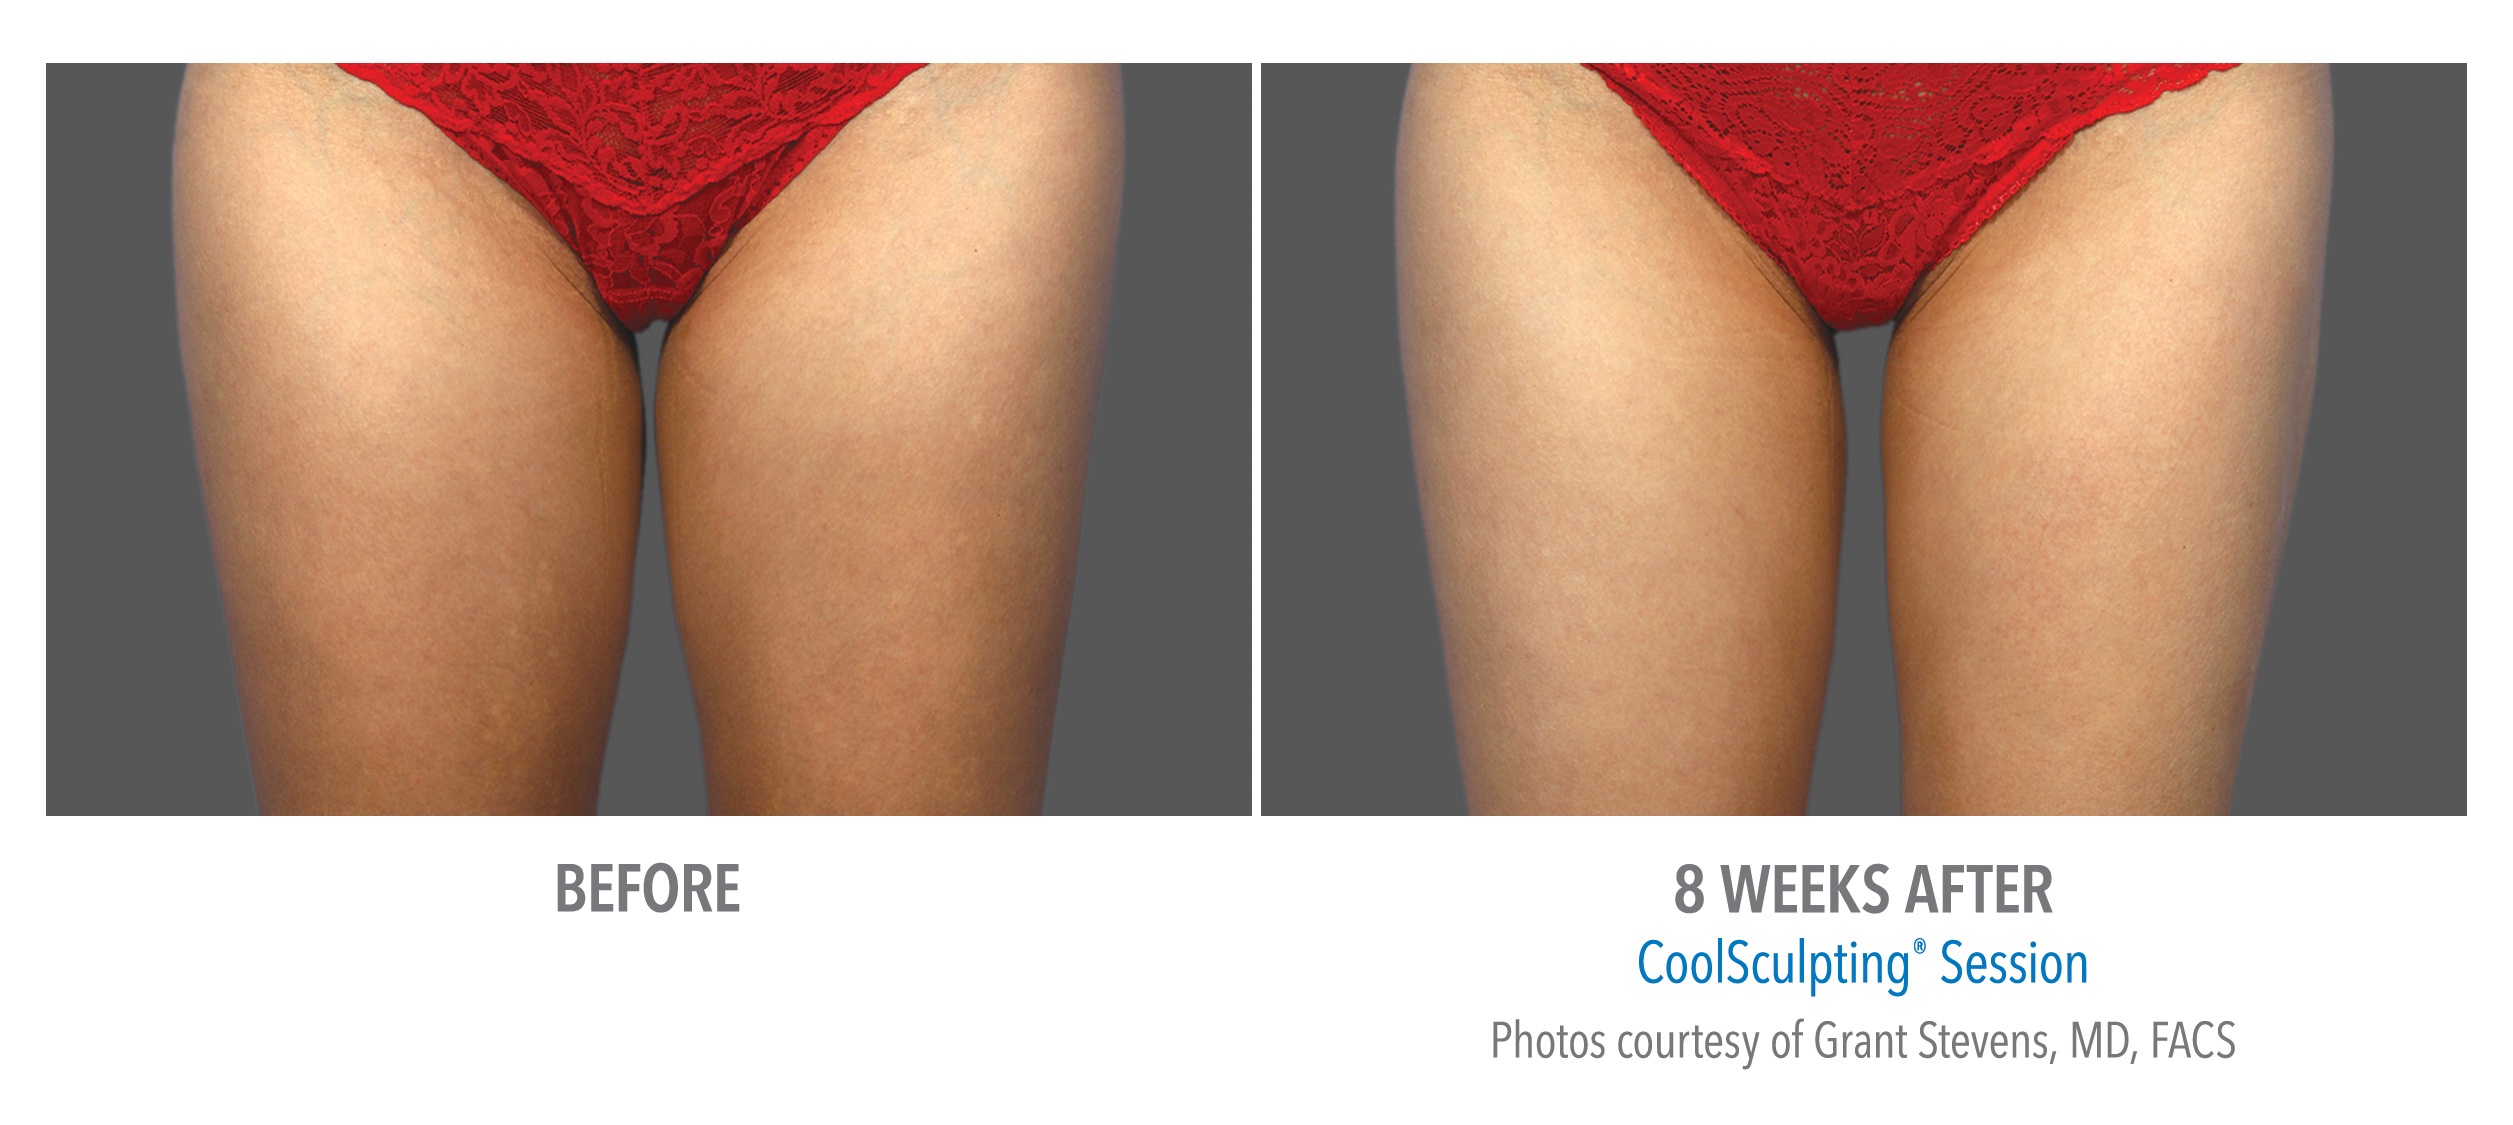 CoolSculpting Before & After Photos | Thighs 2